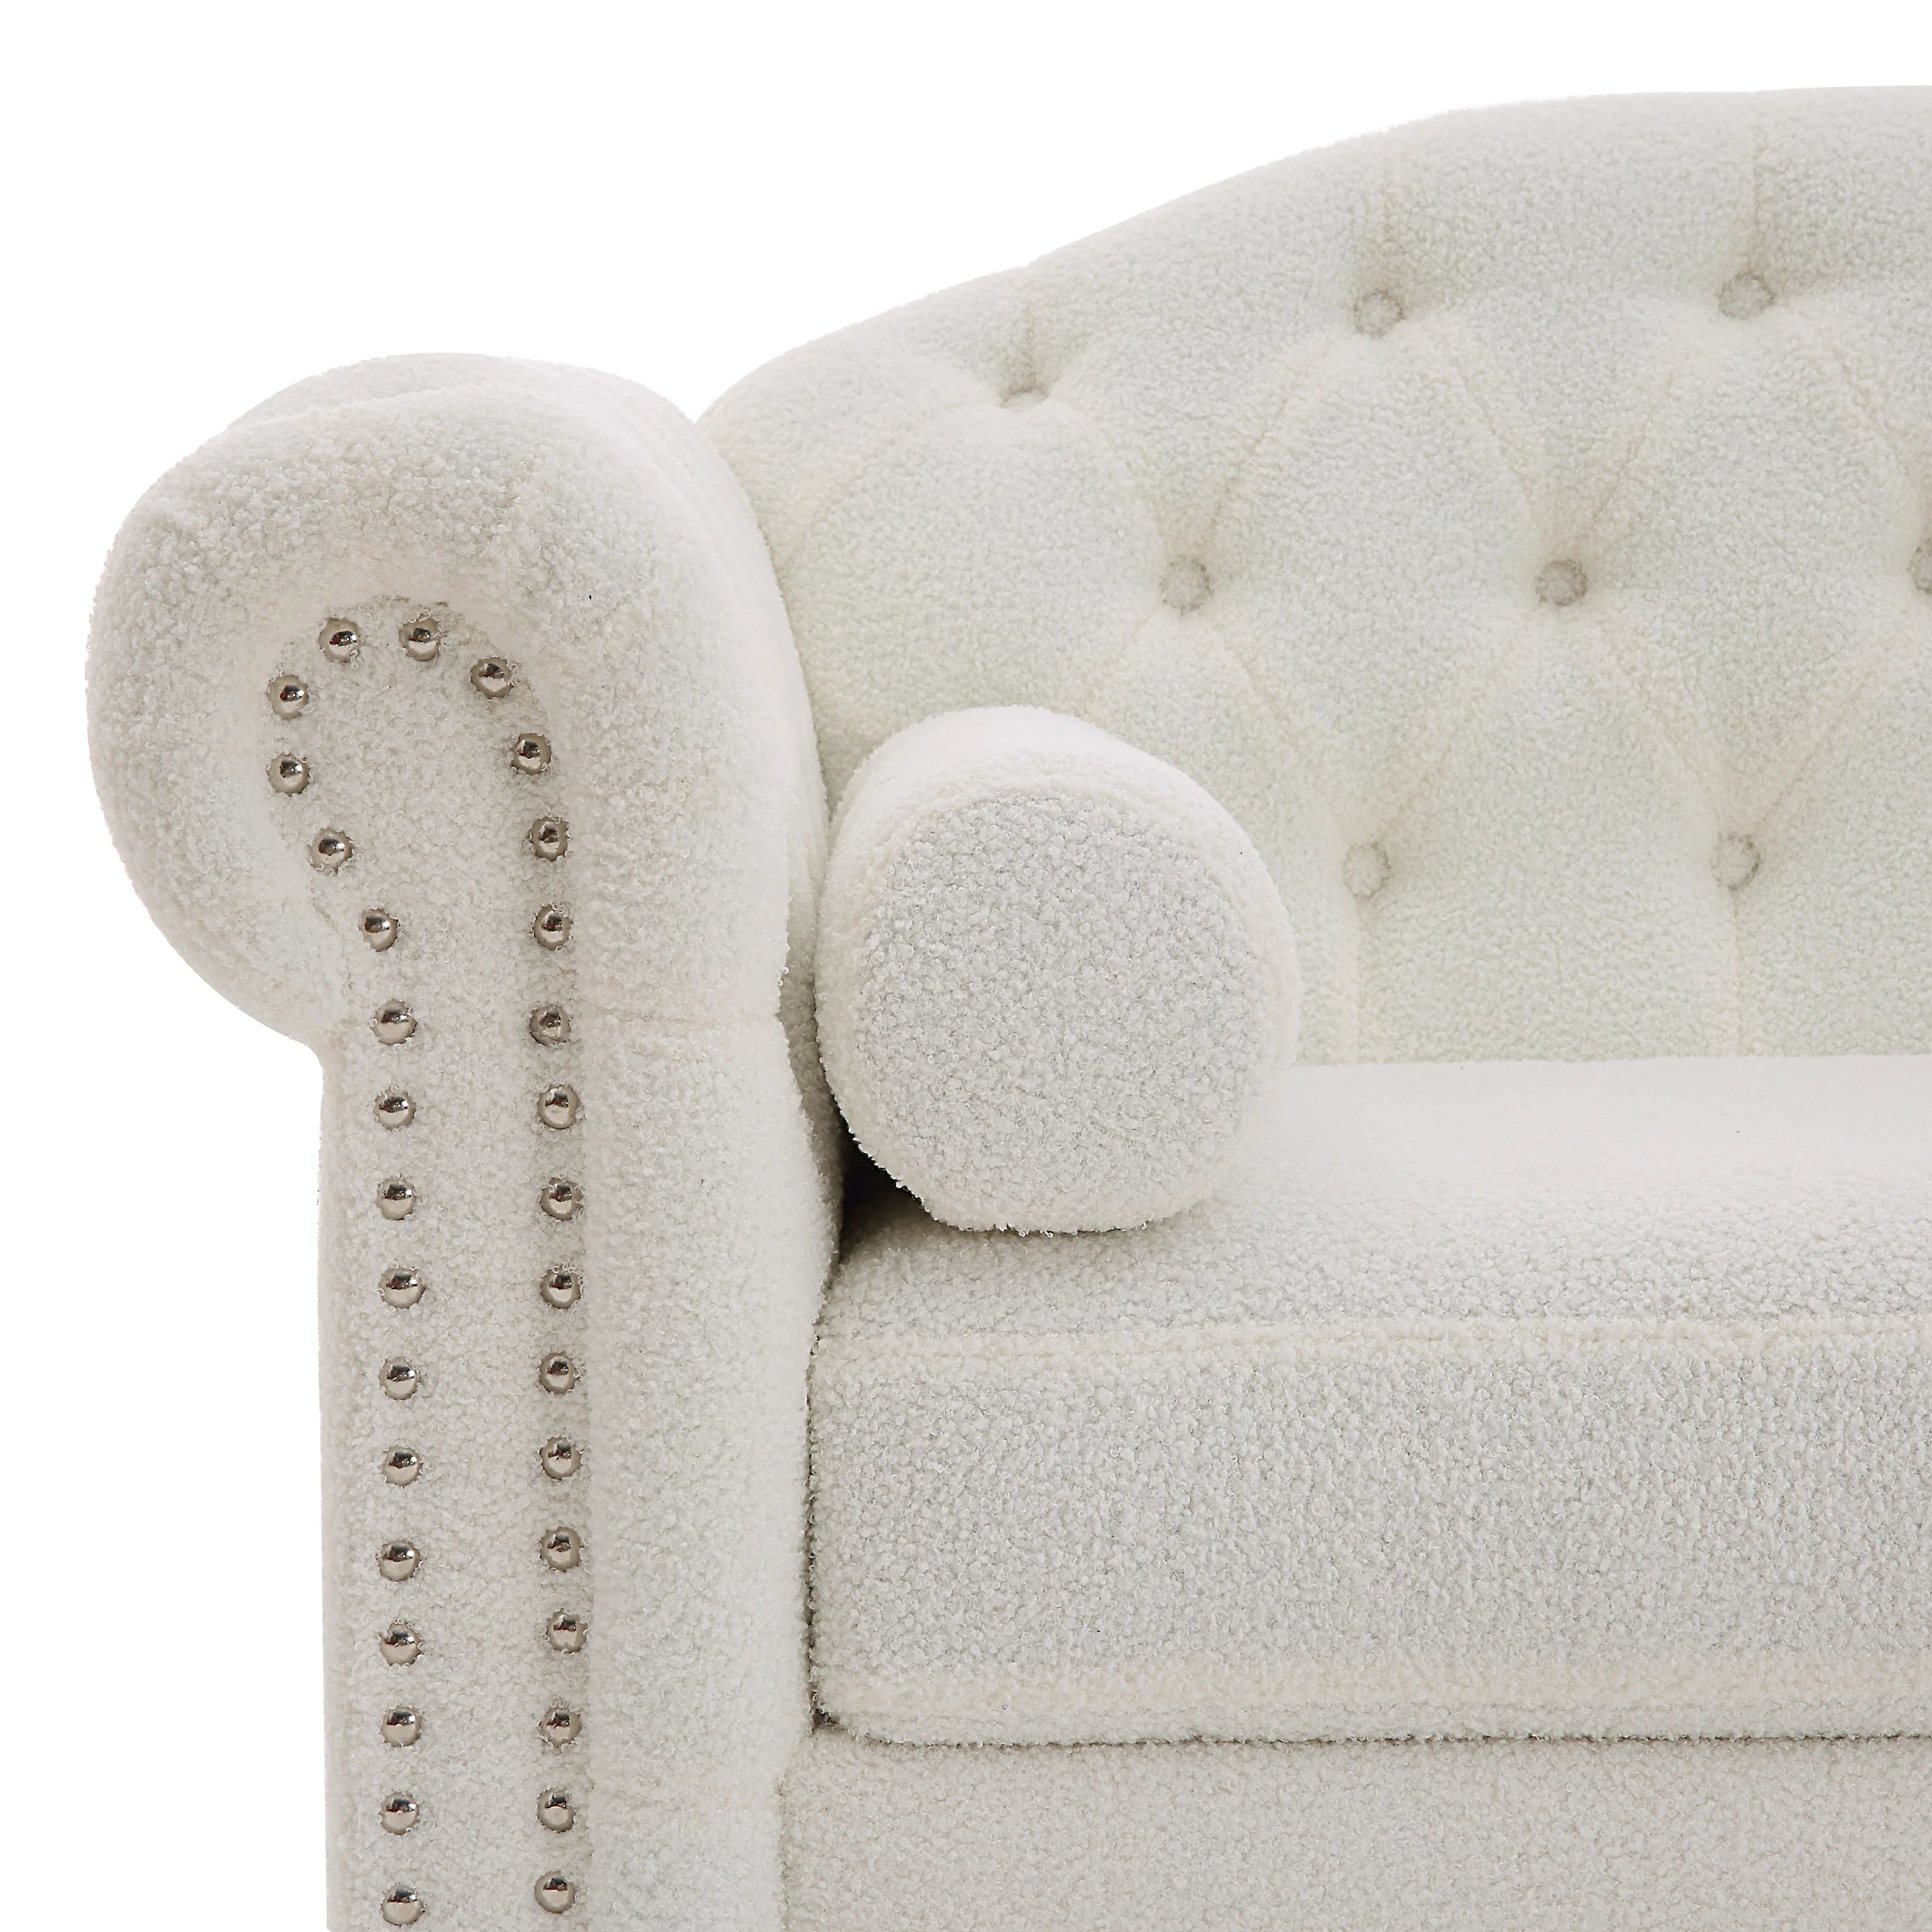 Classic Traditional Living Room Upholstered Sofa with high-tech Fabric Surface Chesterfield Tufted Fabric Sofa Couch Large-White